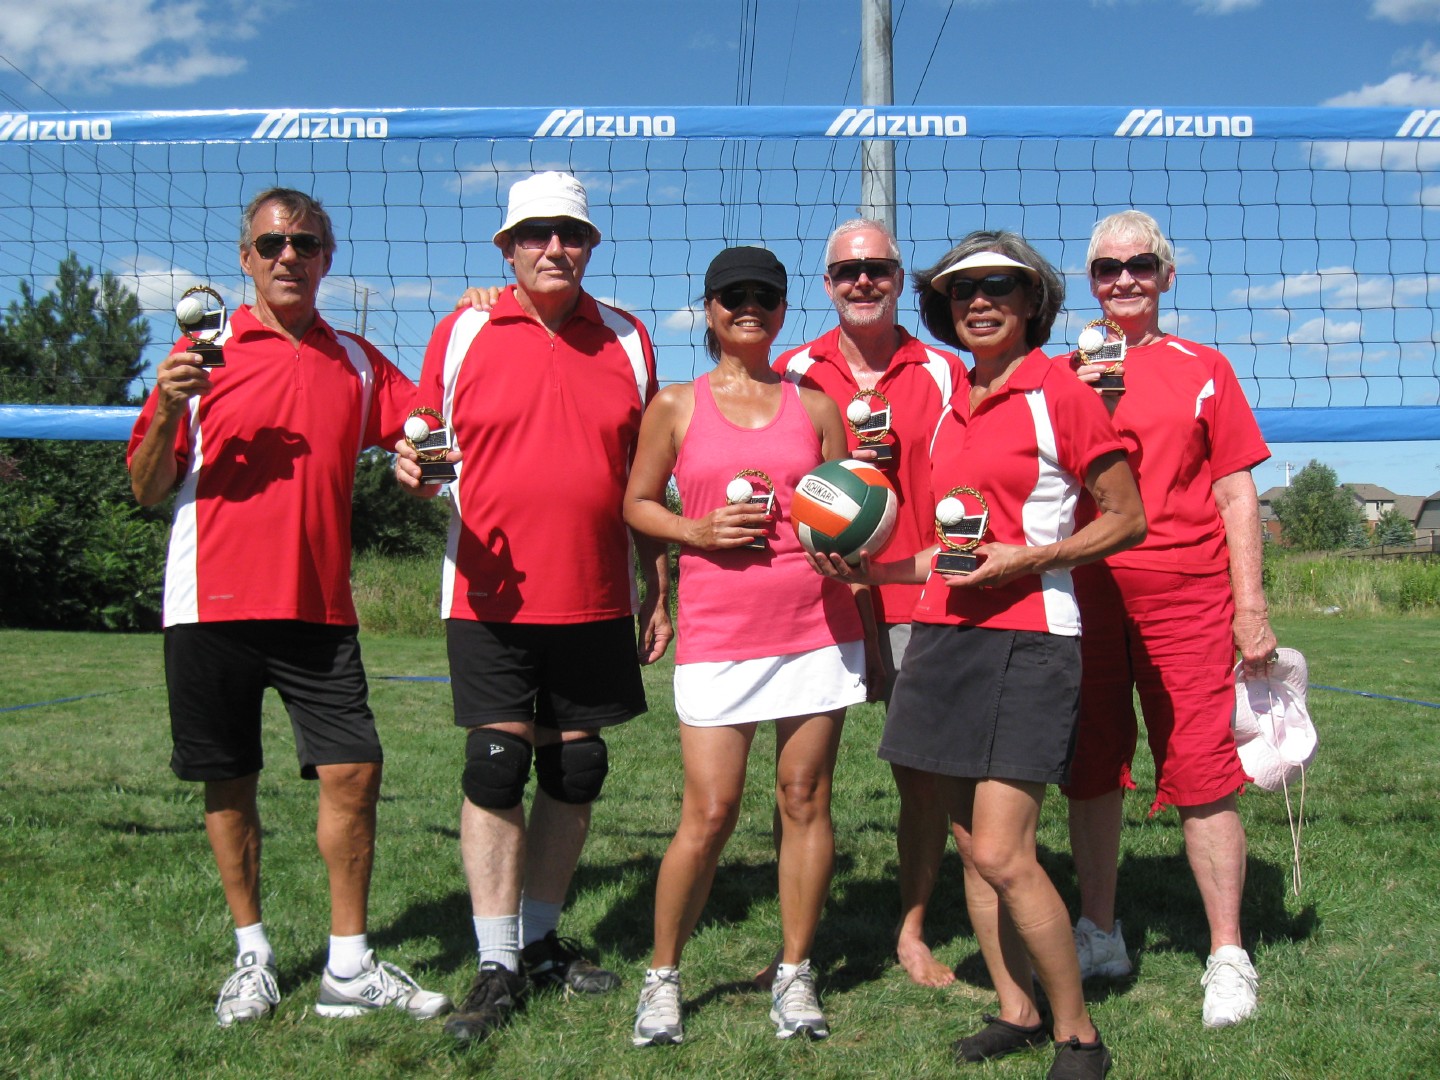 [Tansley Woods Volleyball Tournament, August 10, 2013]